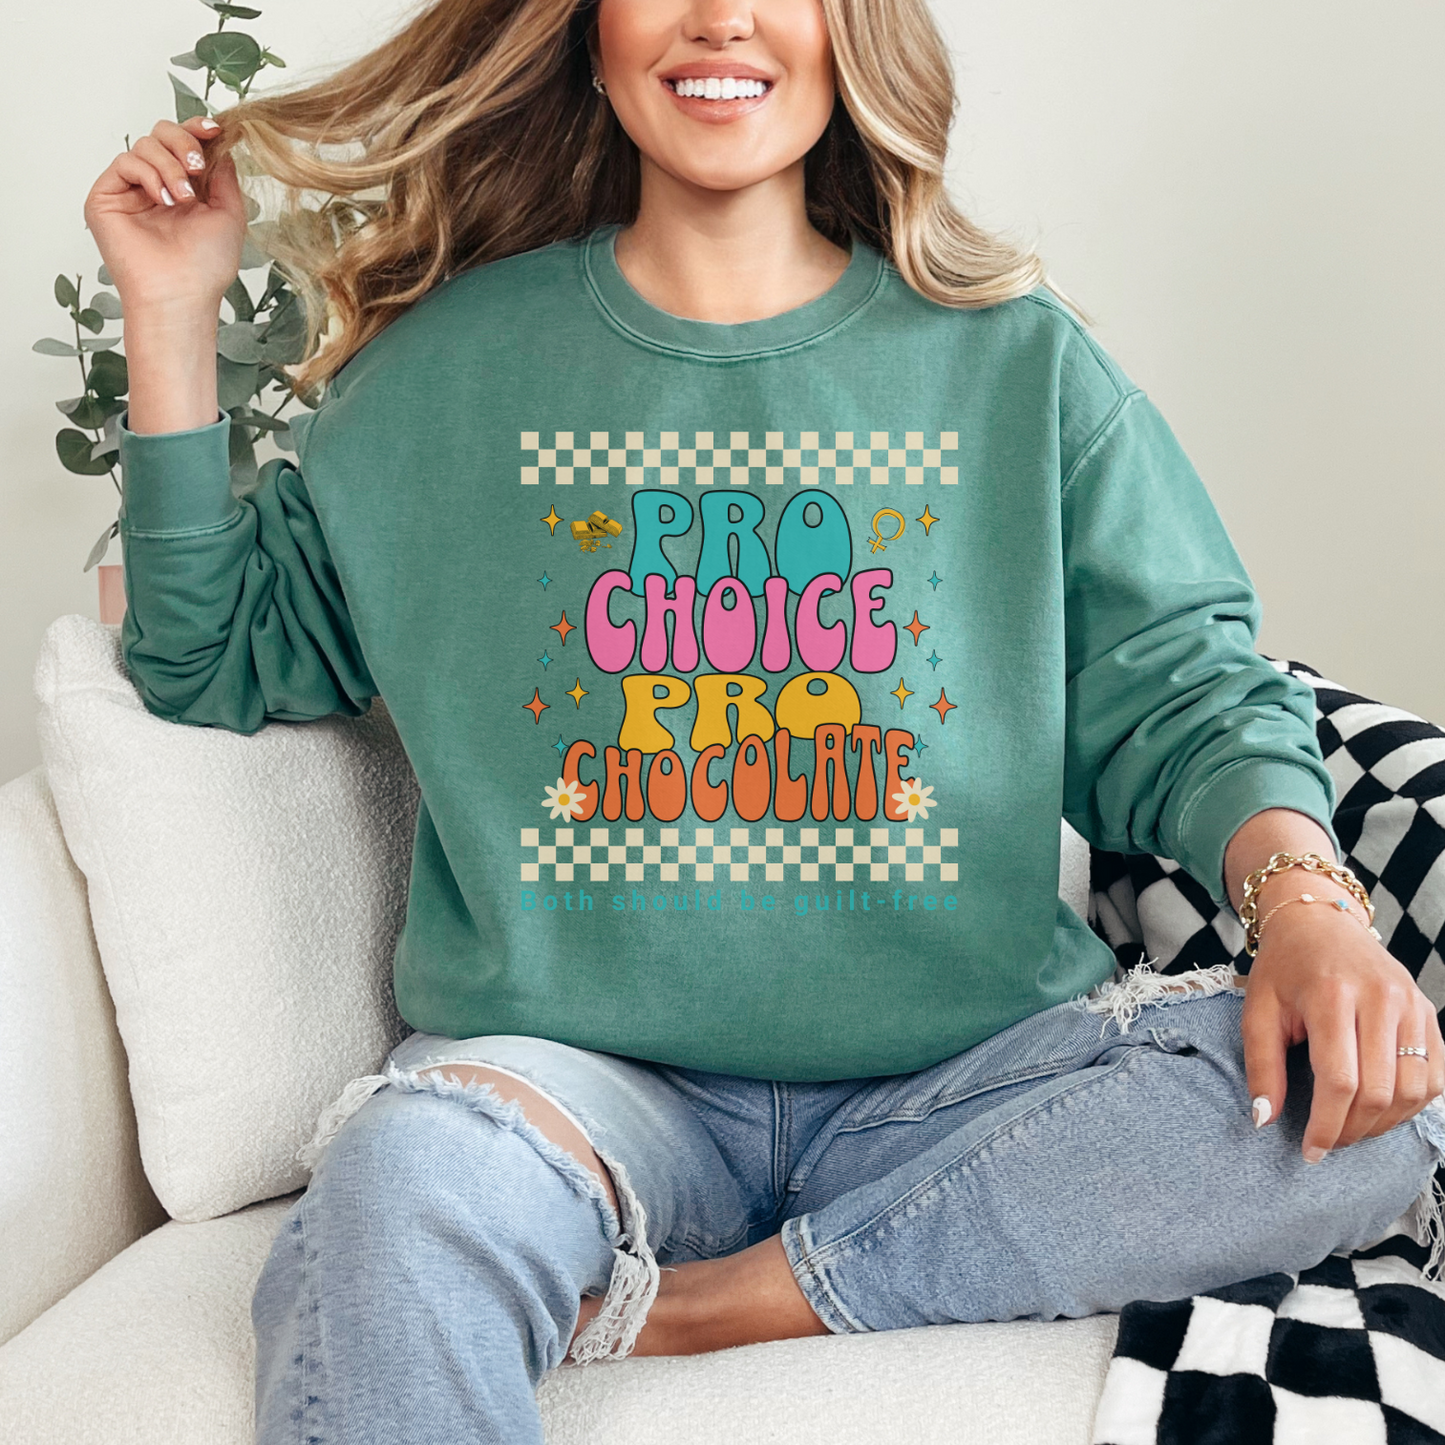 This light-green Comfort Colors sweatshirt is a fun color to match the fun retro style, while attracting attention for the serious message of women's rights. Order in quantities so all of your friends can make a collective statement for women.